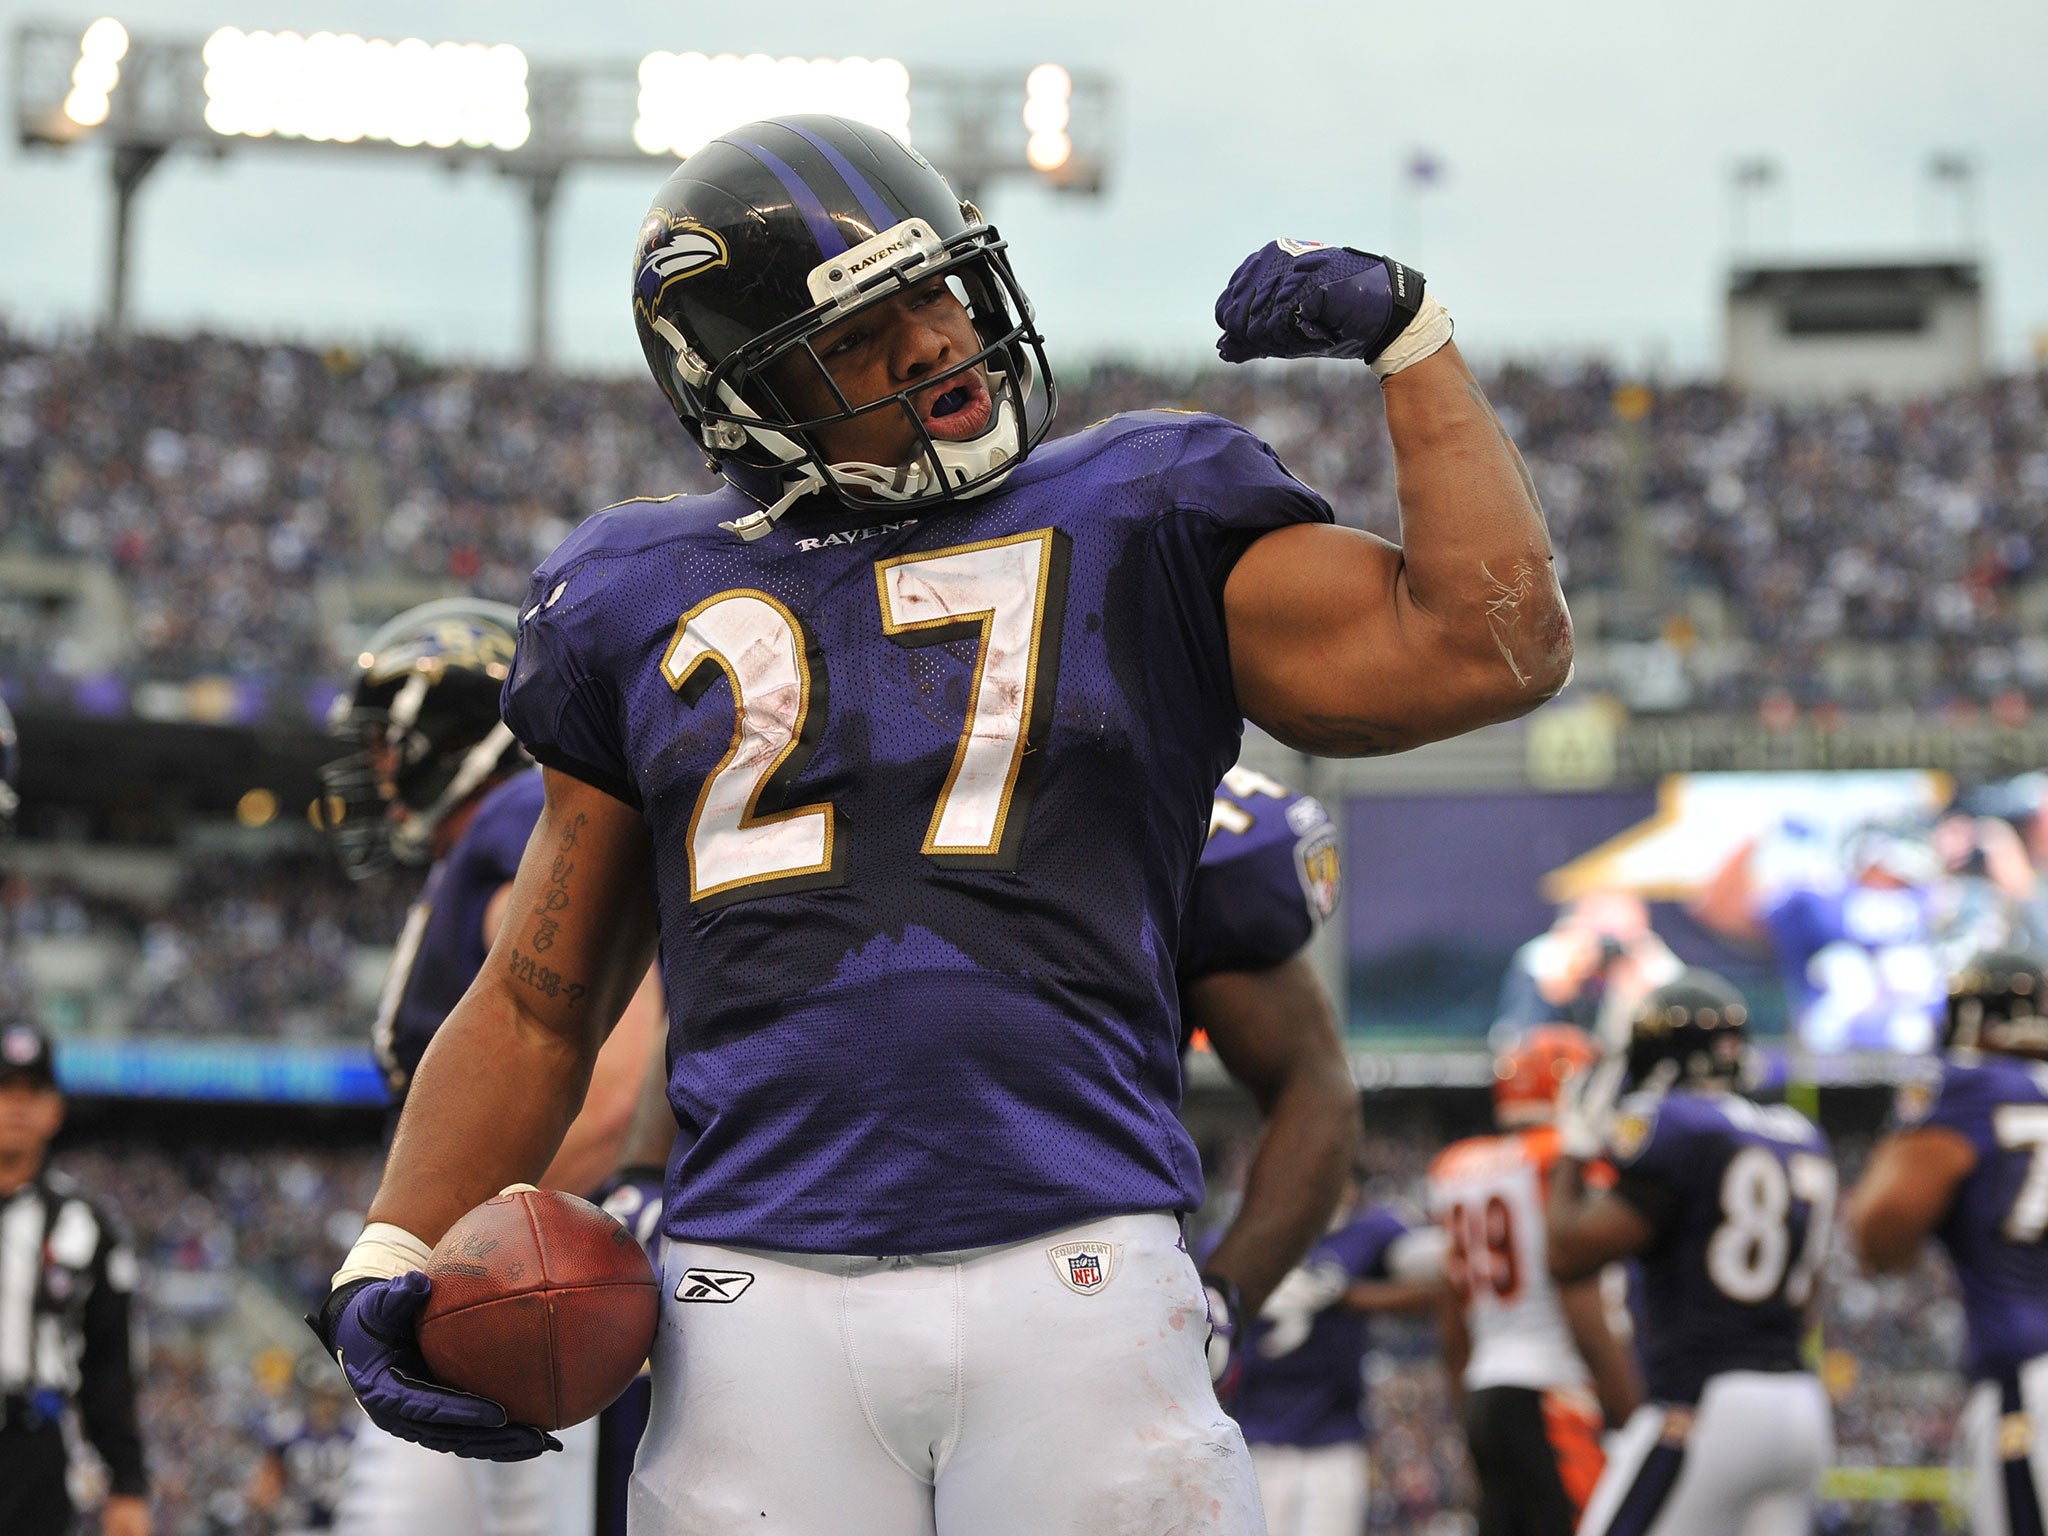 Rice won the Superbowl in 2013 with the Ravens